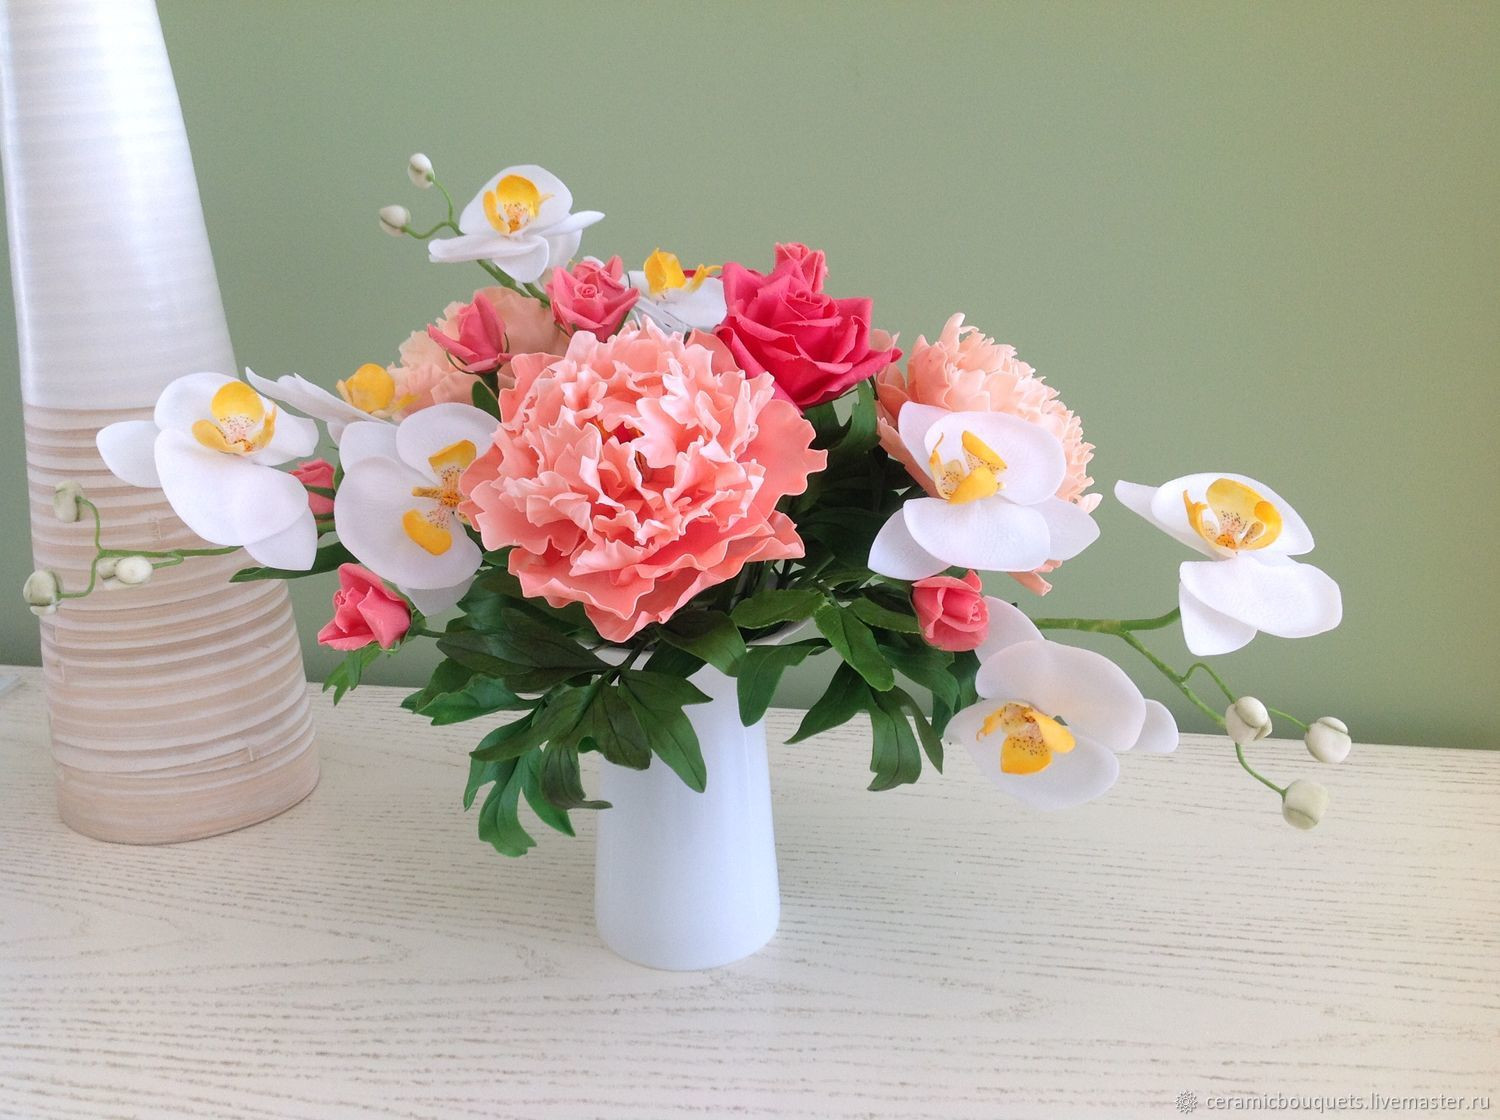 polymer clay vase of bouquet of coral peonies with orchids shop online on livemaster for florist arrangements handmade livemaster handmade buy bouquet of coral peonies with orchids